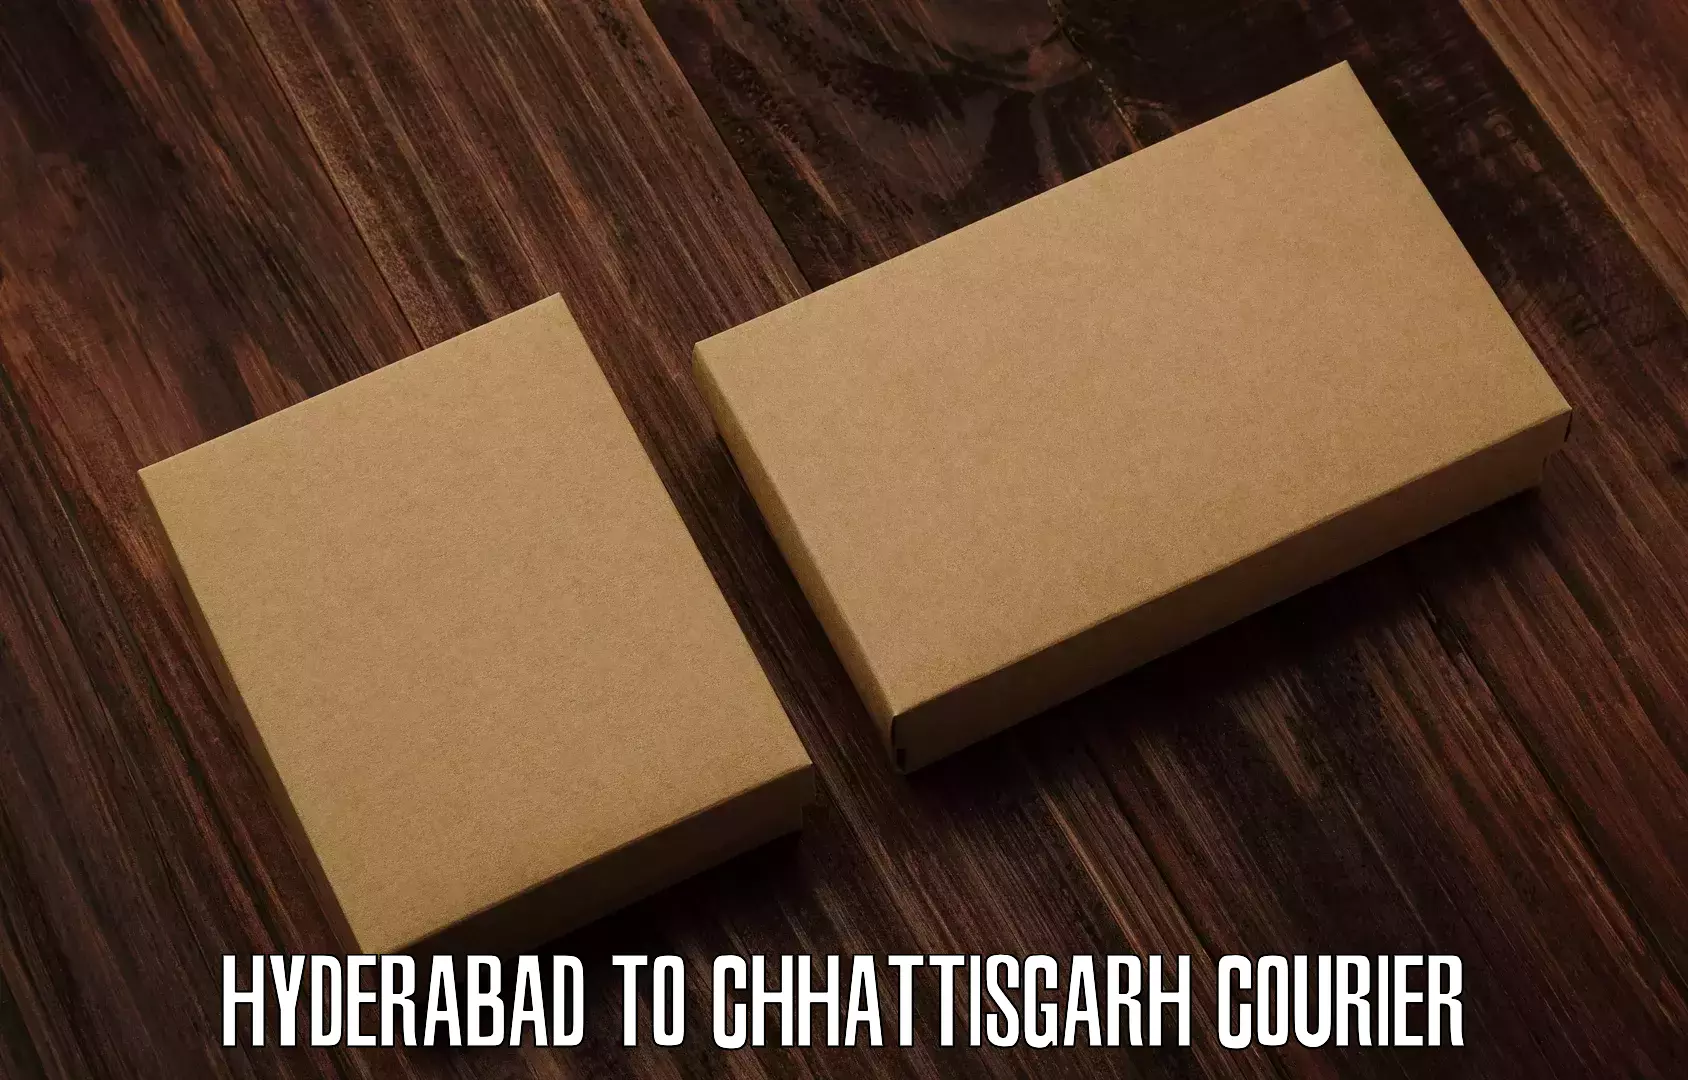 Package delivery network Hyderabad to Chhattisgarh